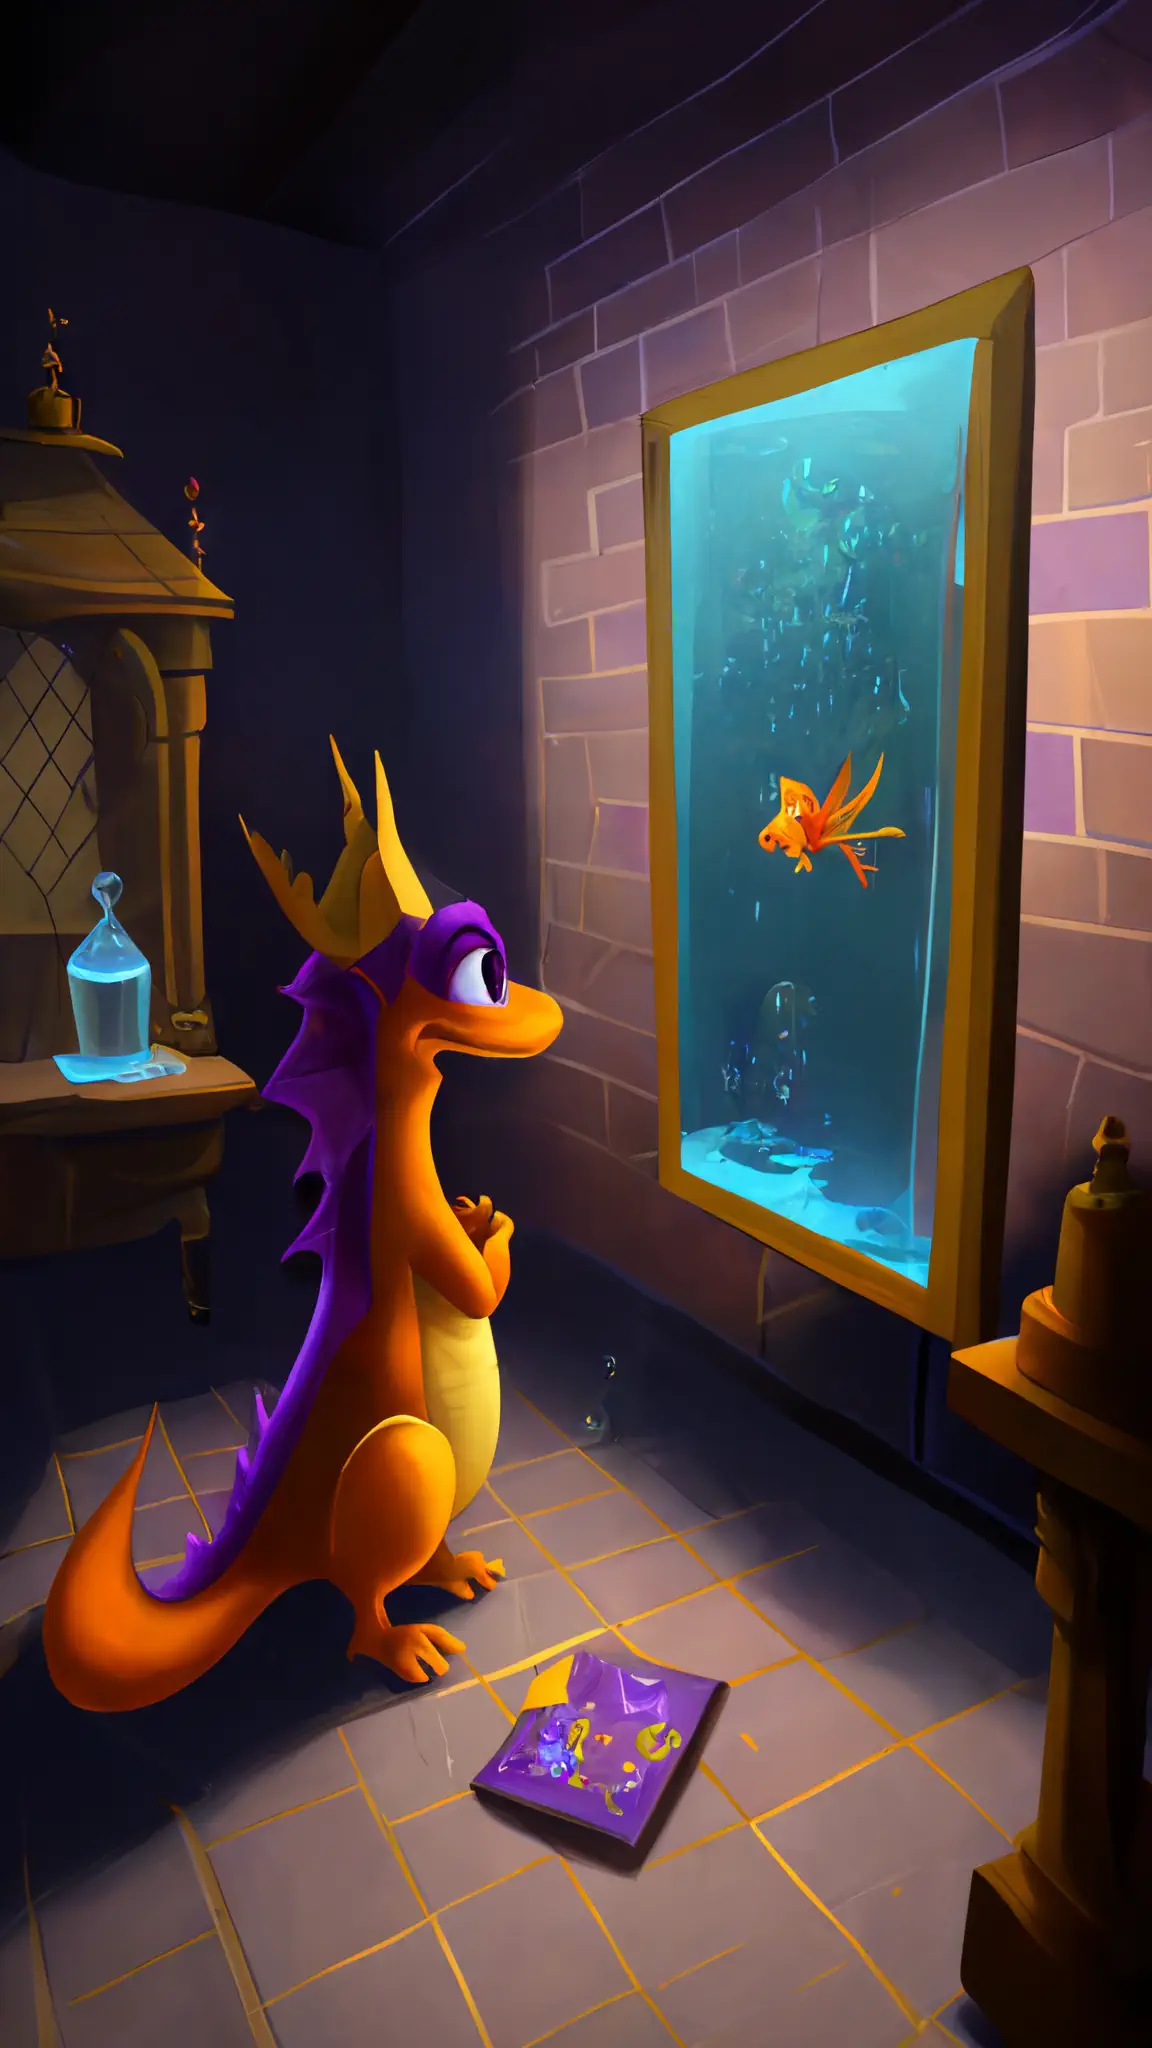 Drakon0_Spyro_the_dragon_stands_in_a_room_and_looks_at_goldfish_019f2e05-7bfe-4256-8a7e-d71c8d7d2a58